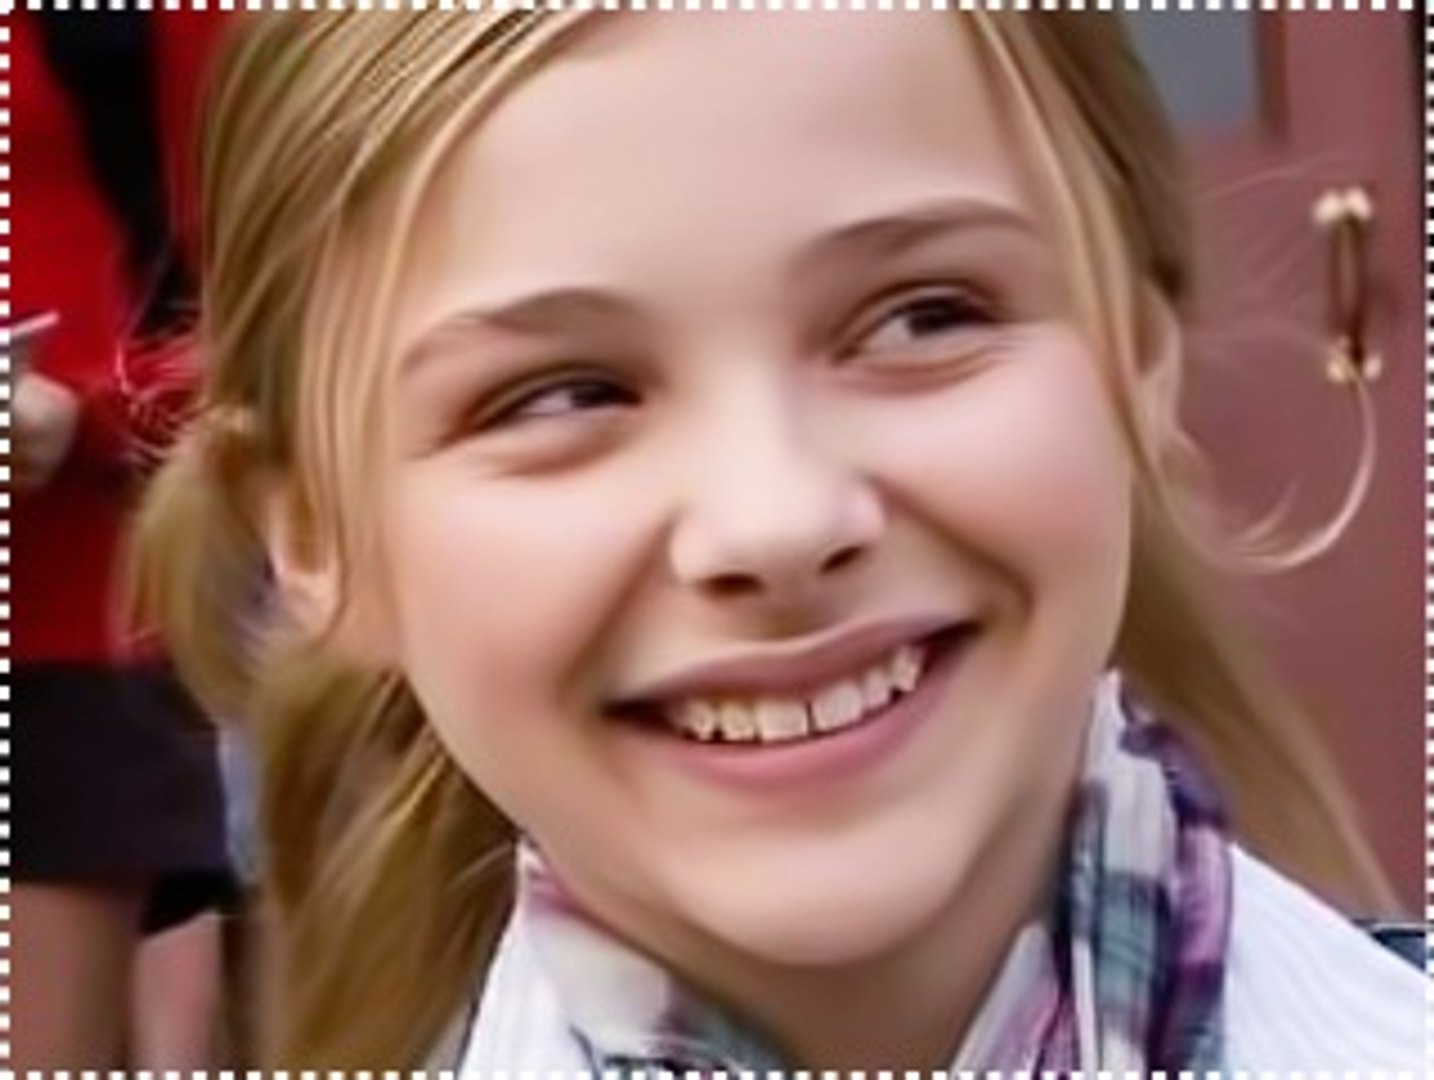 In 'Diary of a Wimpy Kid' (2010) Chloë Grace Moretz is there and I